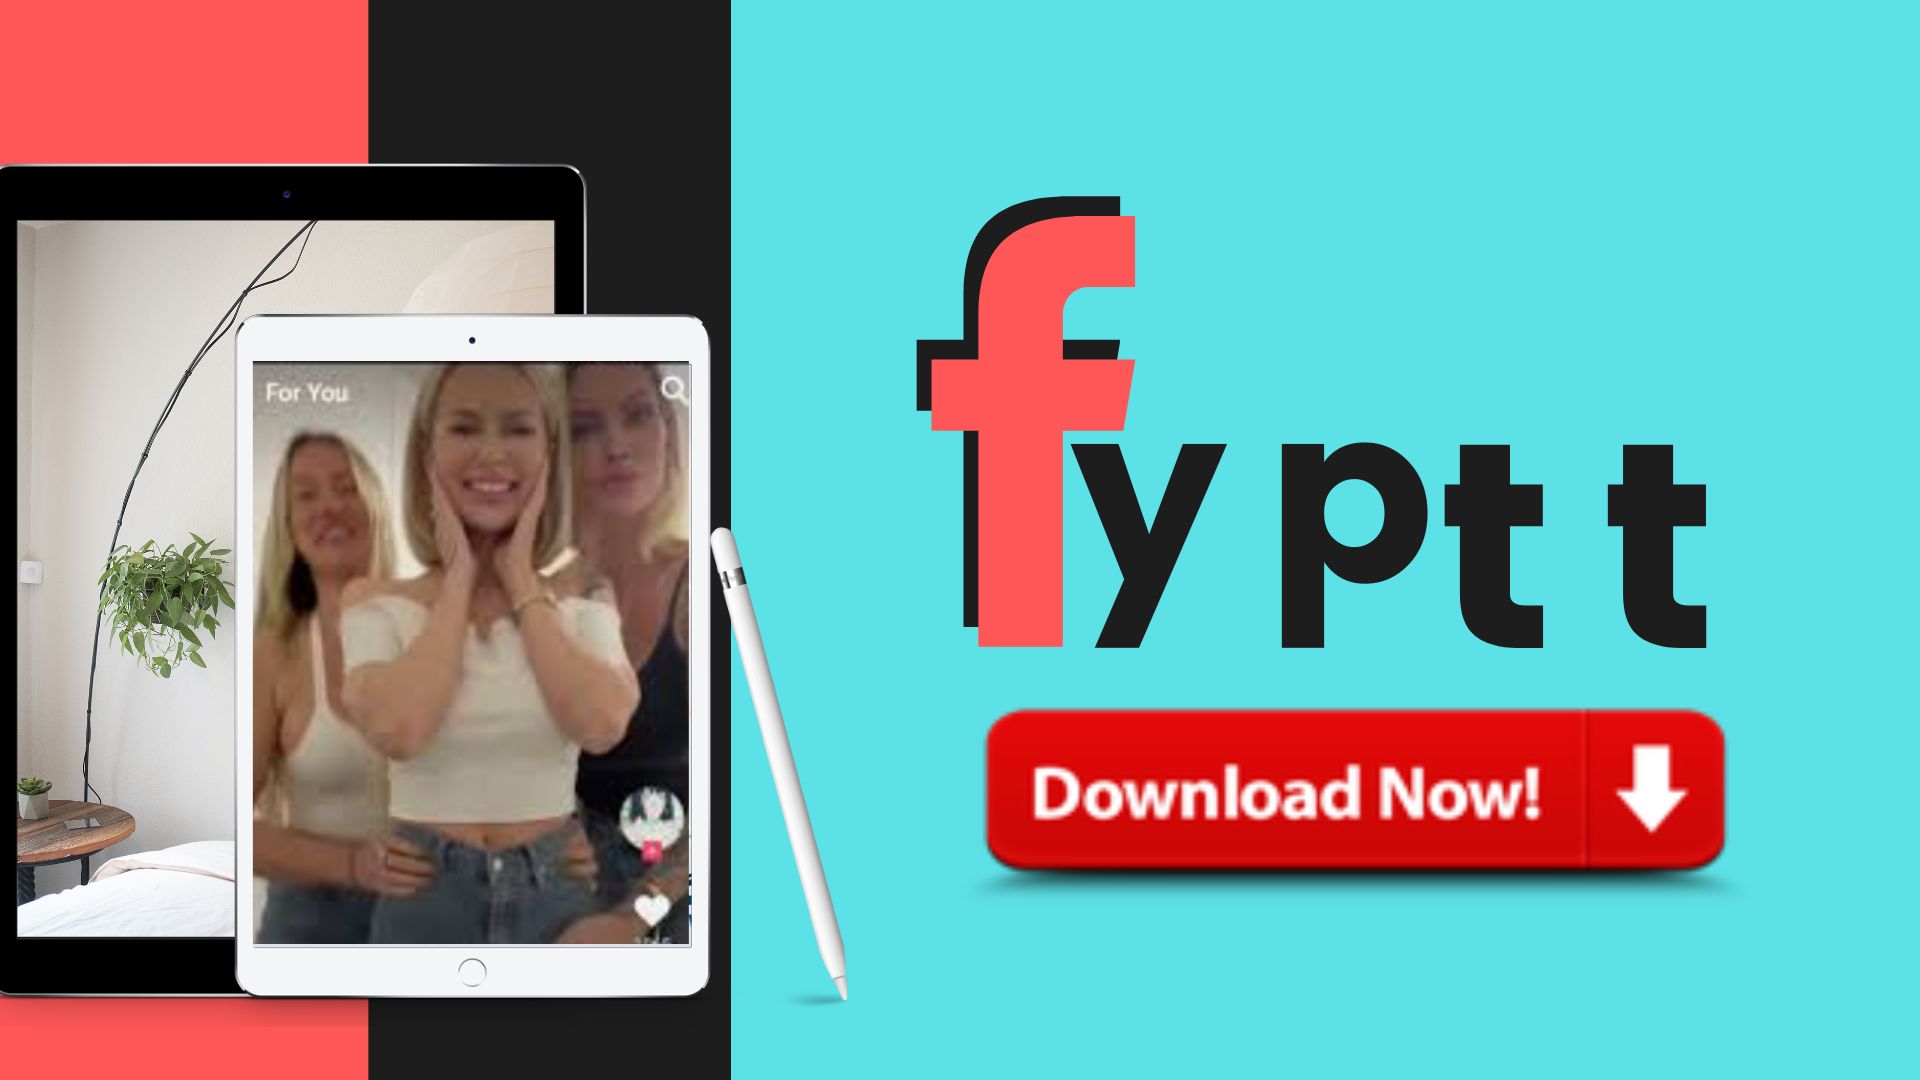 What Are The Features Of FYPTT App?